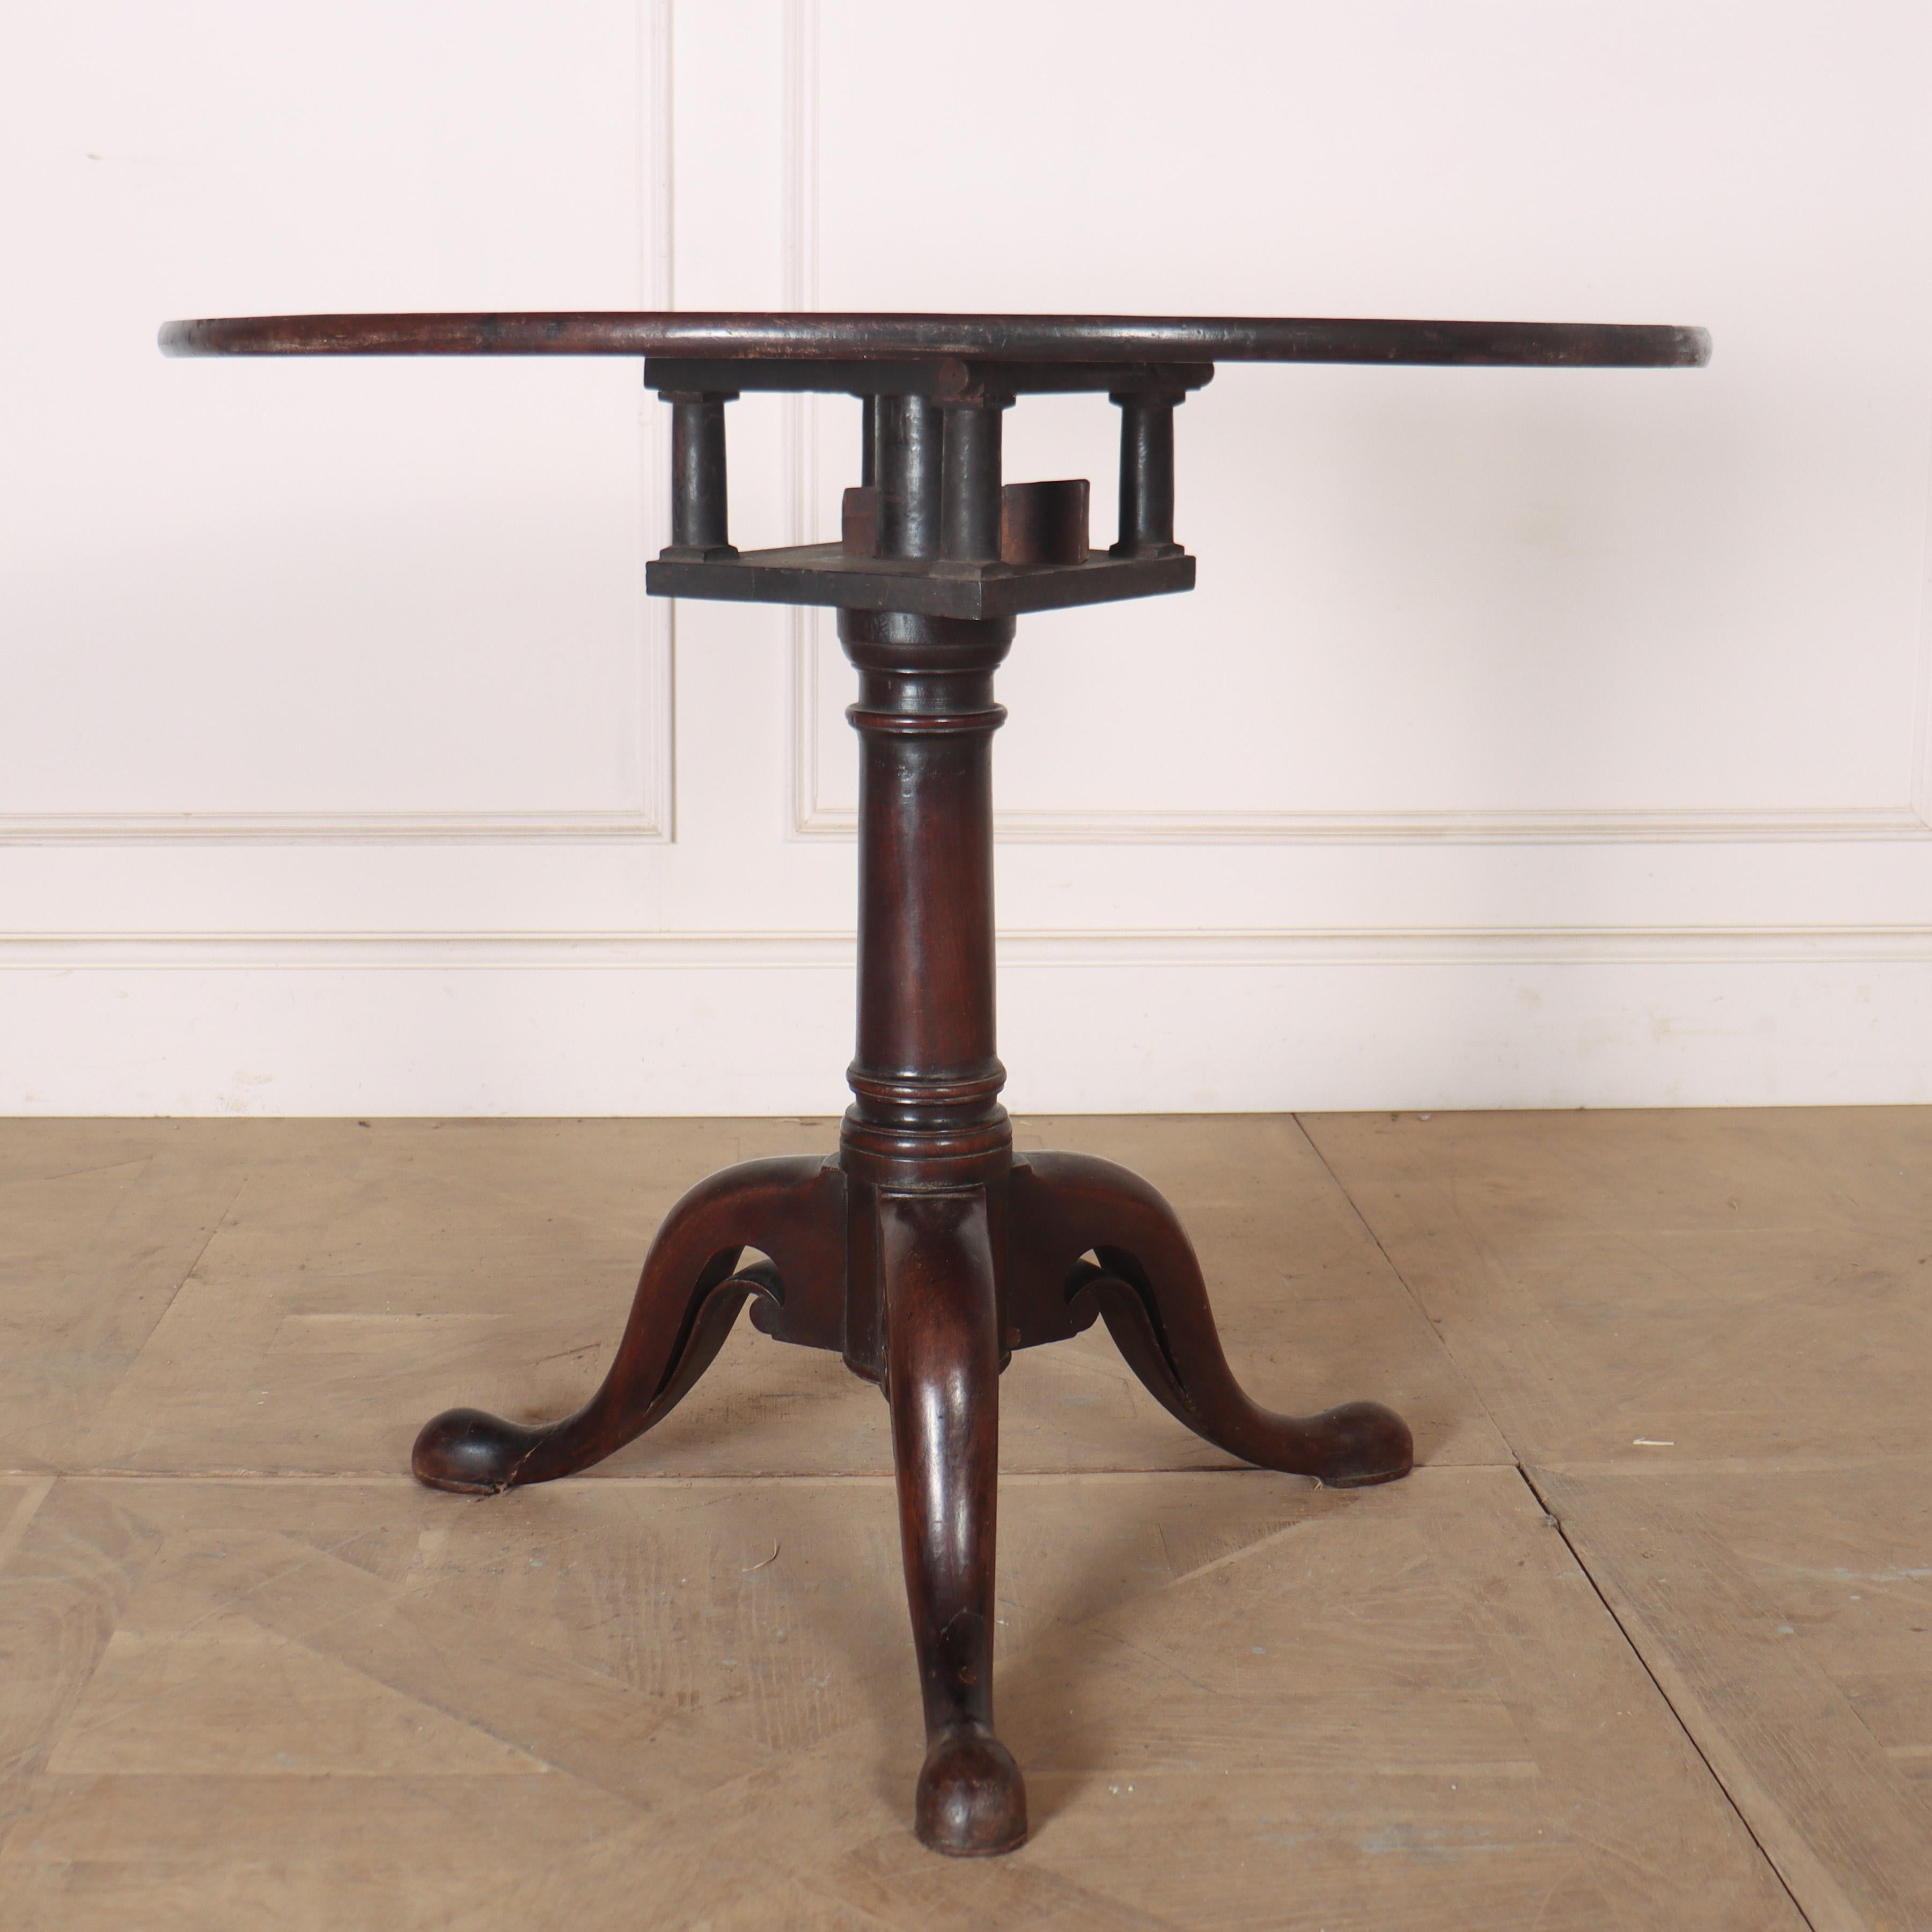 Wonderful 18th C mahogany English tripod table. Good two piece top. 1760.

Reference: 8258

Dimensions
28 inches (71 cms) High
32 inches (81 cms) Diameter